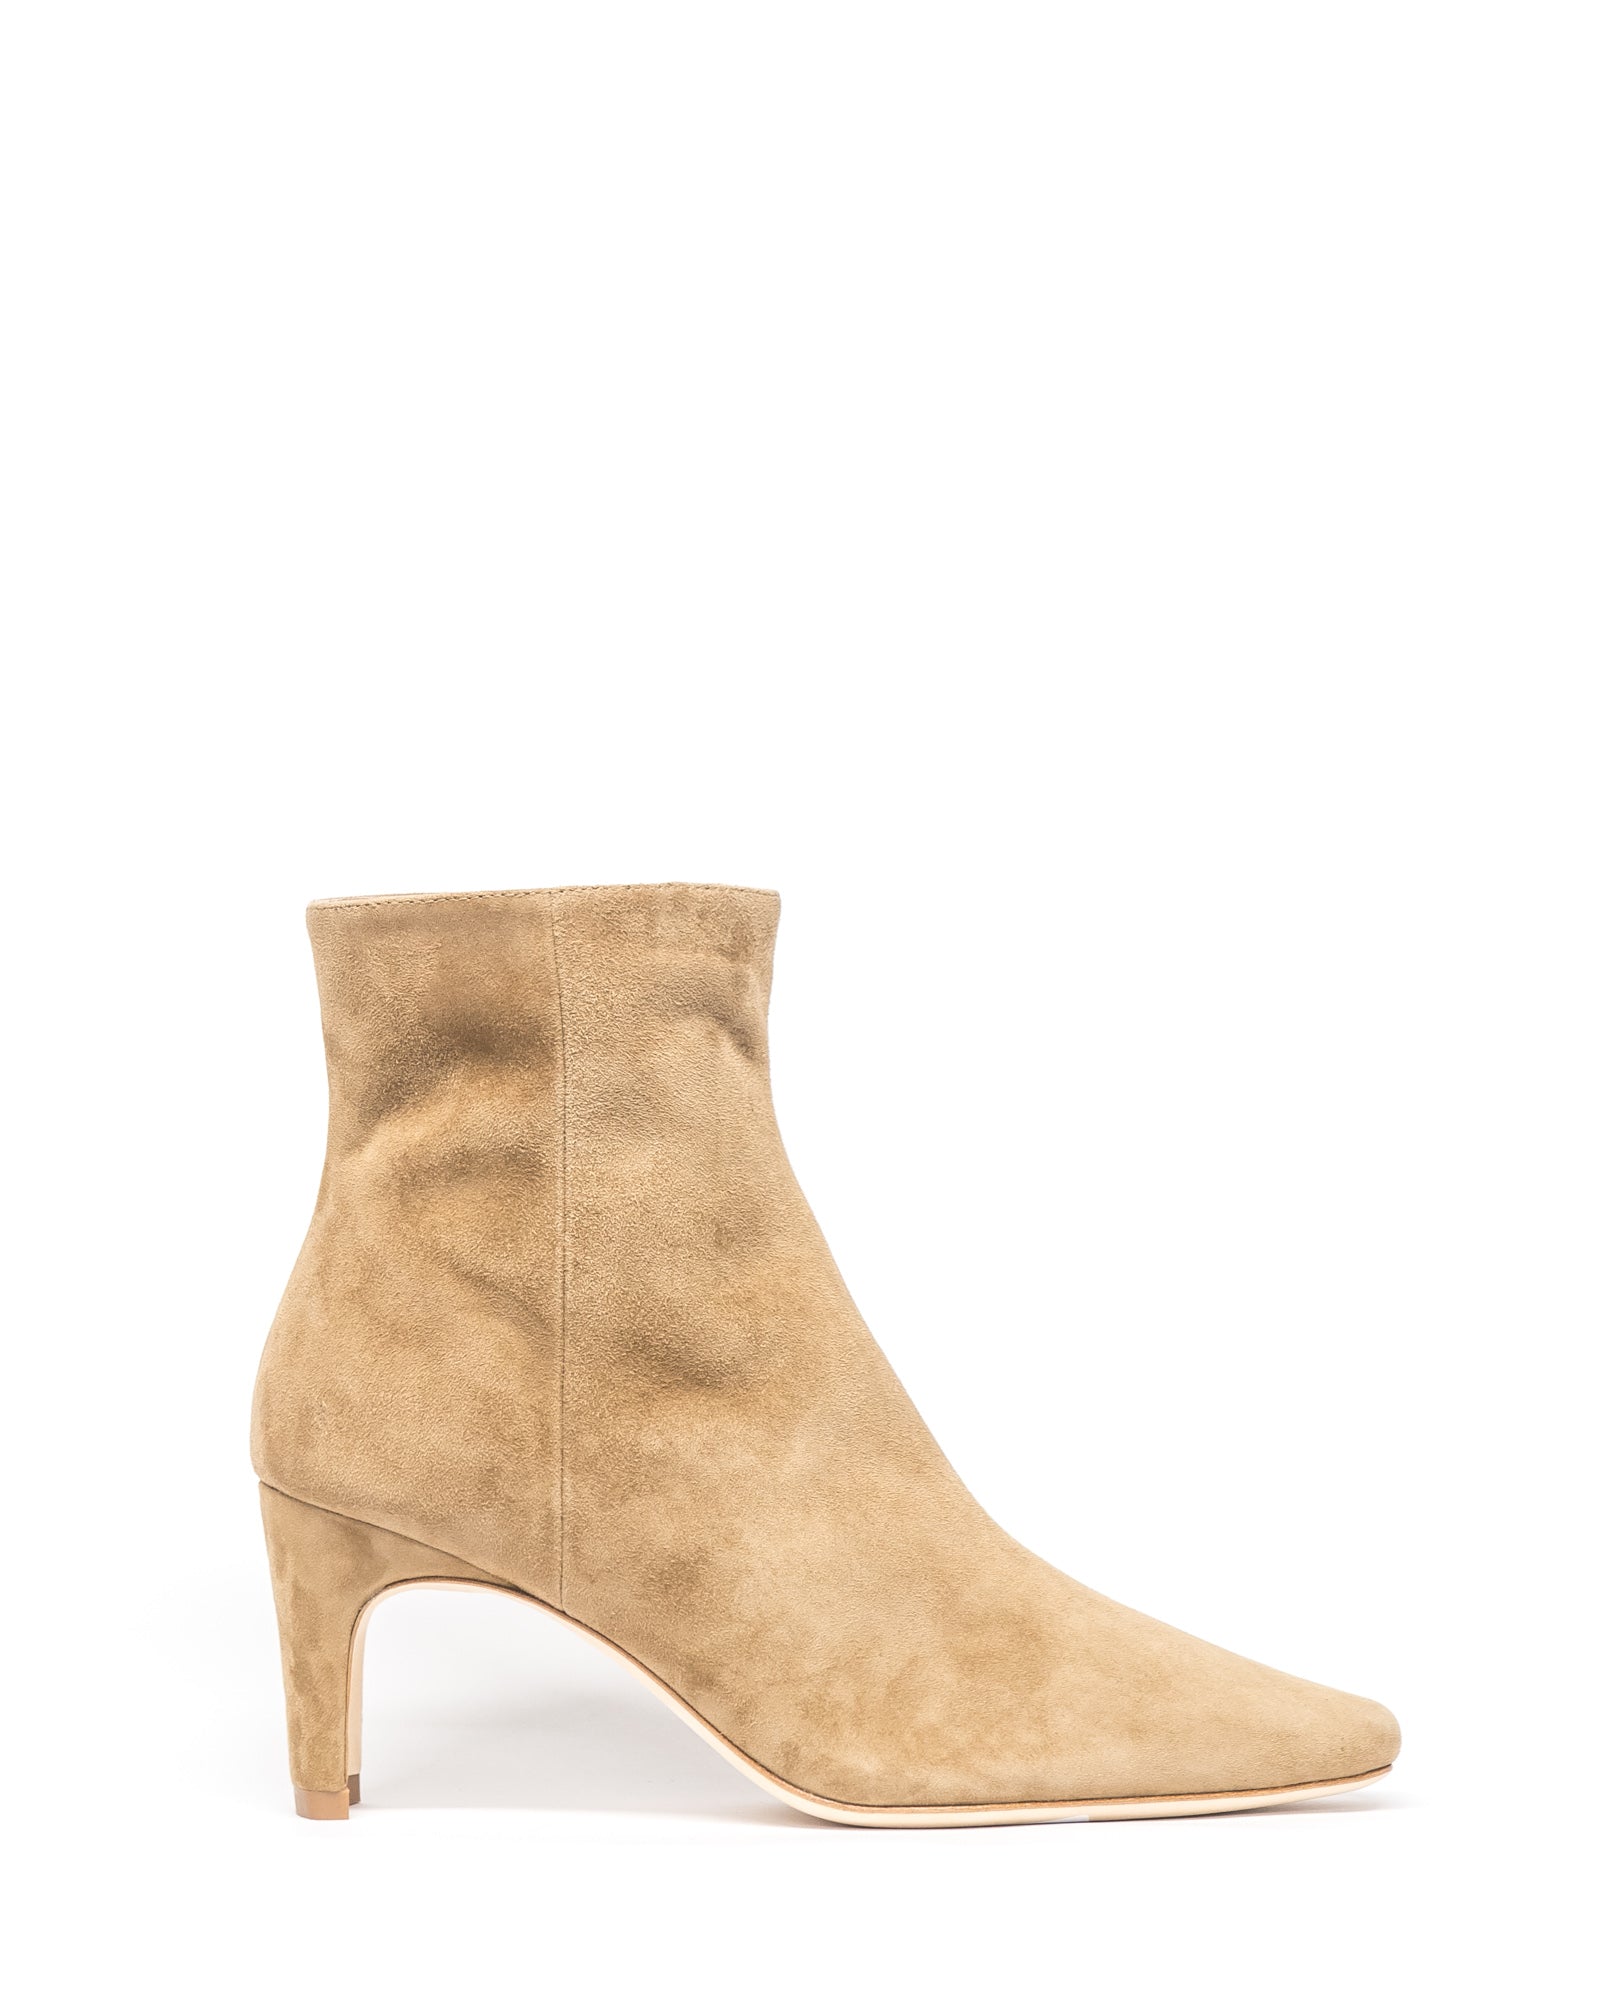 rouge boot - gingerbread suede